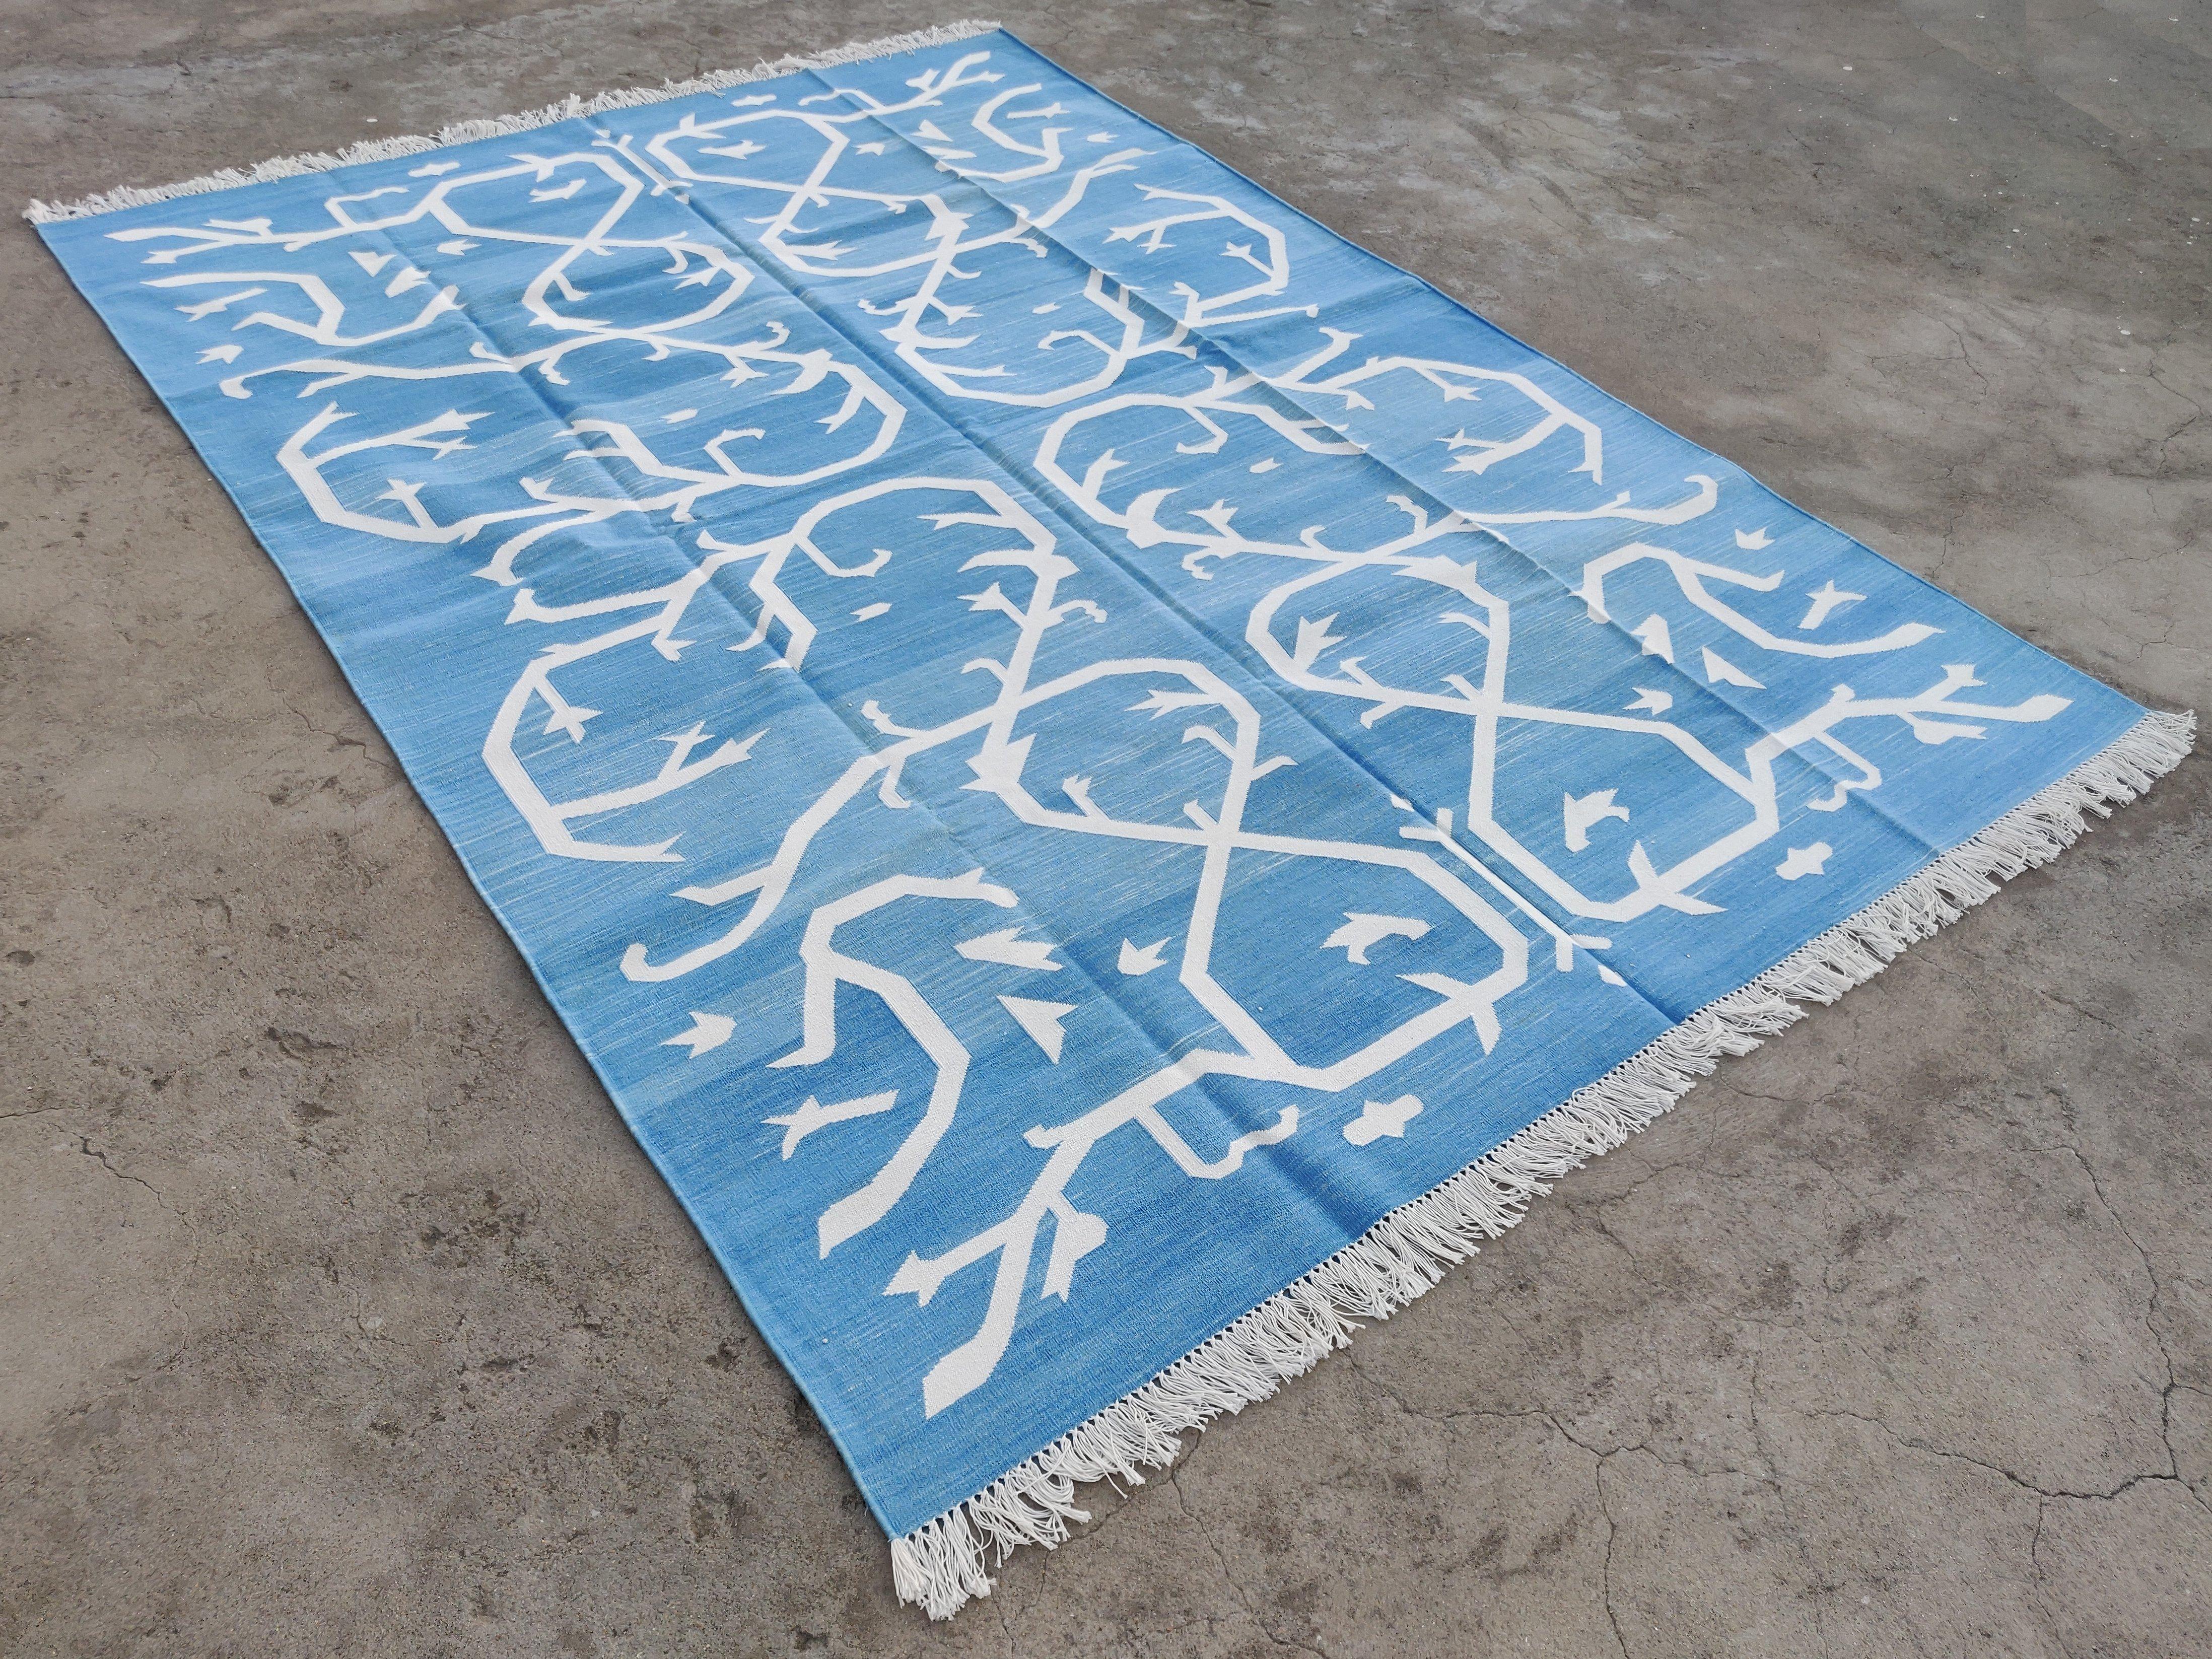 Cotton Vegetable Dyed Sky Blue And White Tree Pattern Indian Dhurrie Rug-6'x9' 
These special flat-weave dhurries are hand-woven with 15 ply 100% cotton yarn. Due to the special manufacturing techniques used to create our rugs, the size and color of